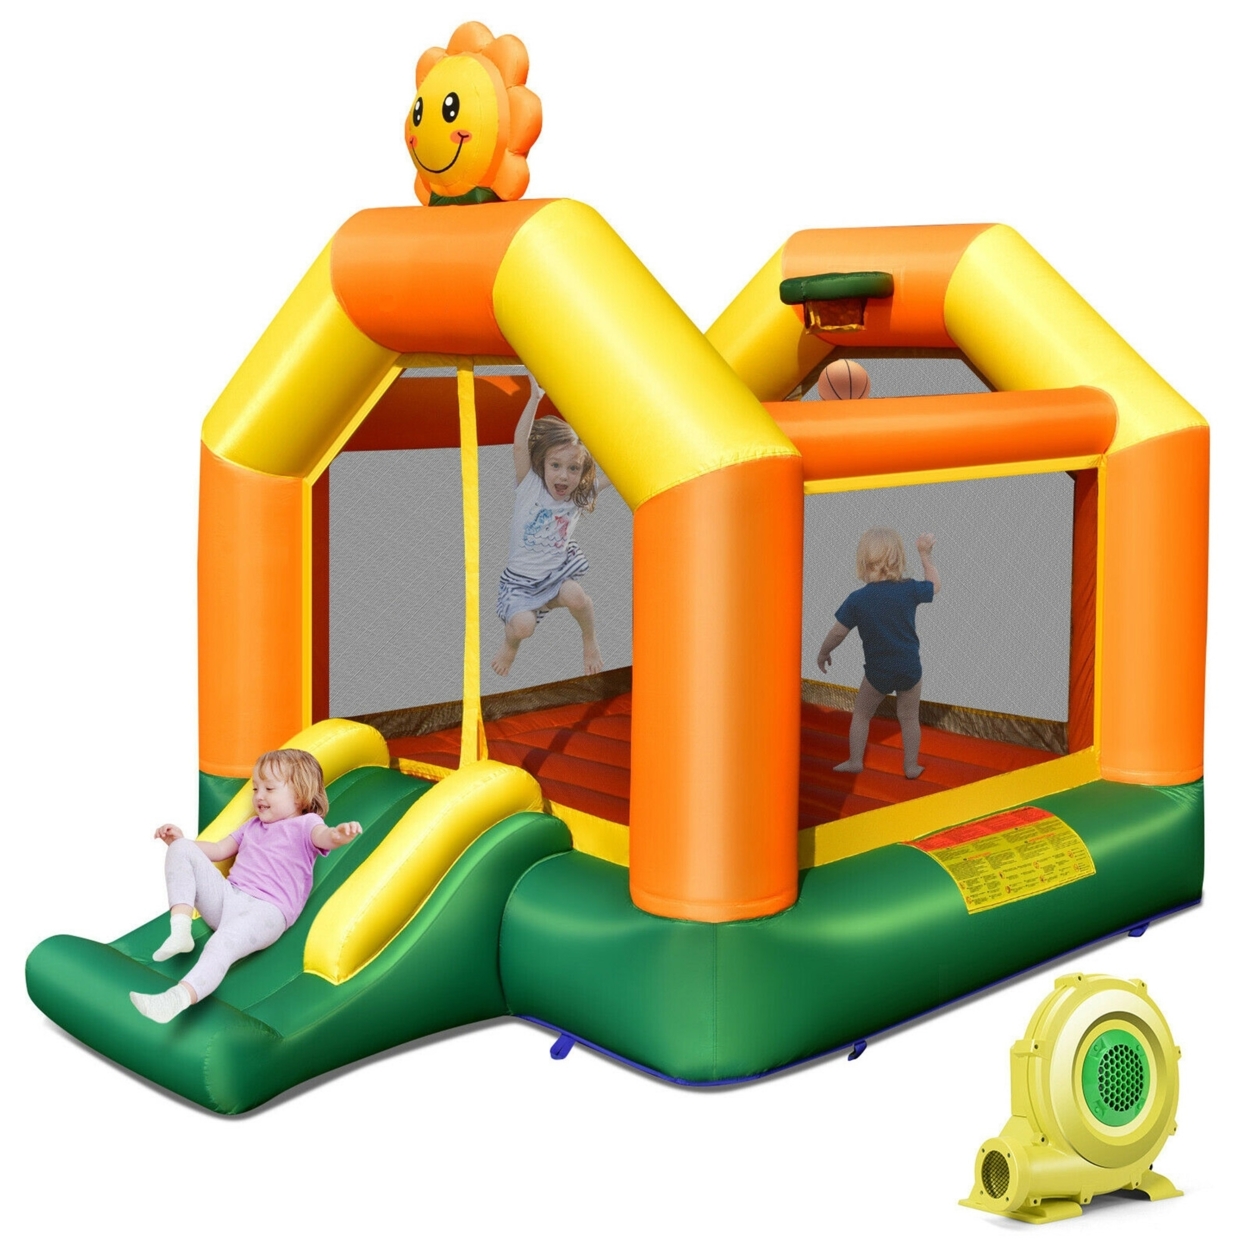 Inflatable Bounce Castle Jumping House Kids Playhouse W/ Slide & 735W Blower